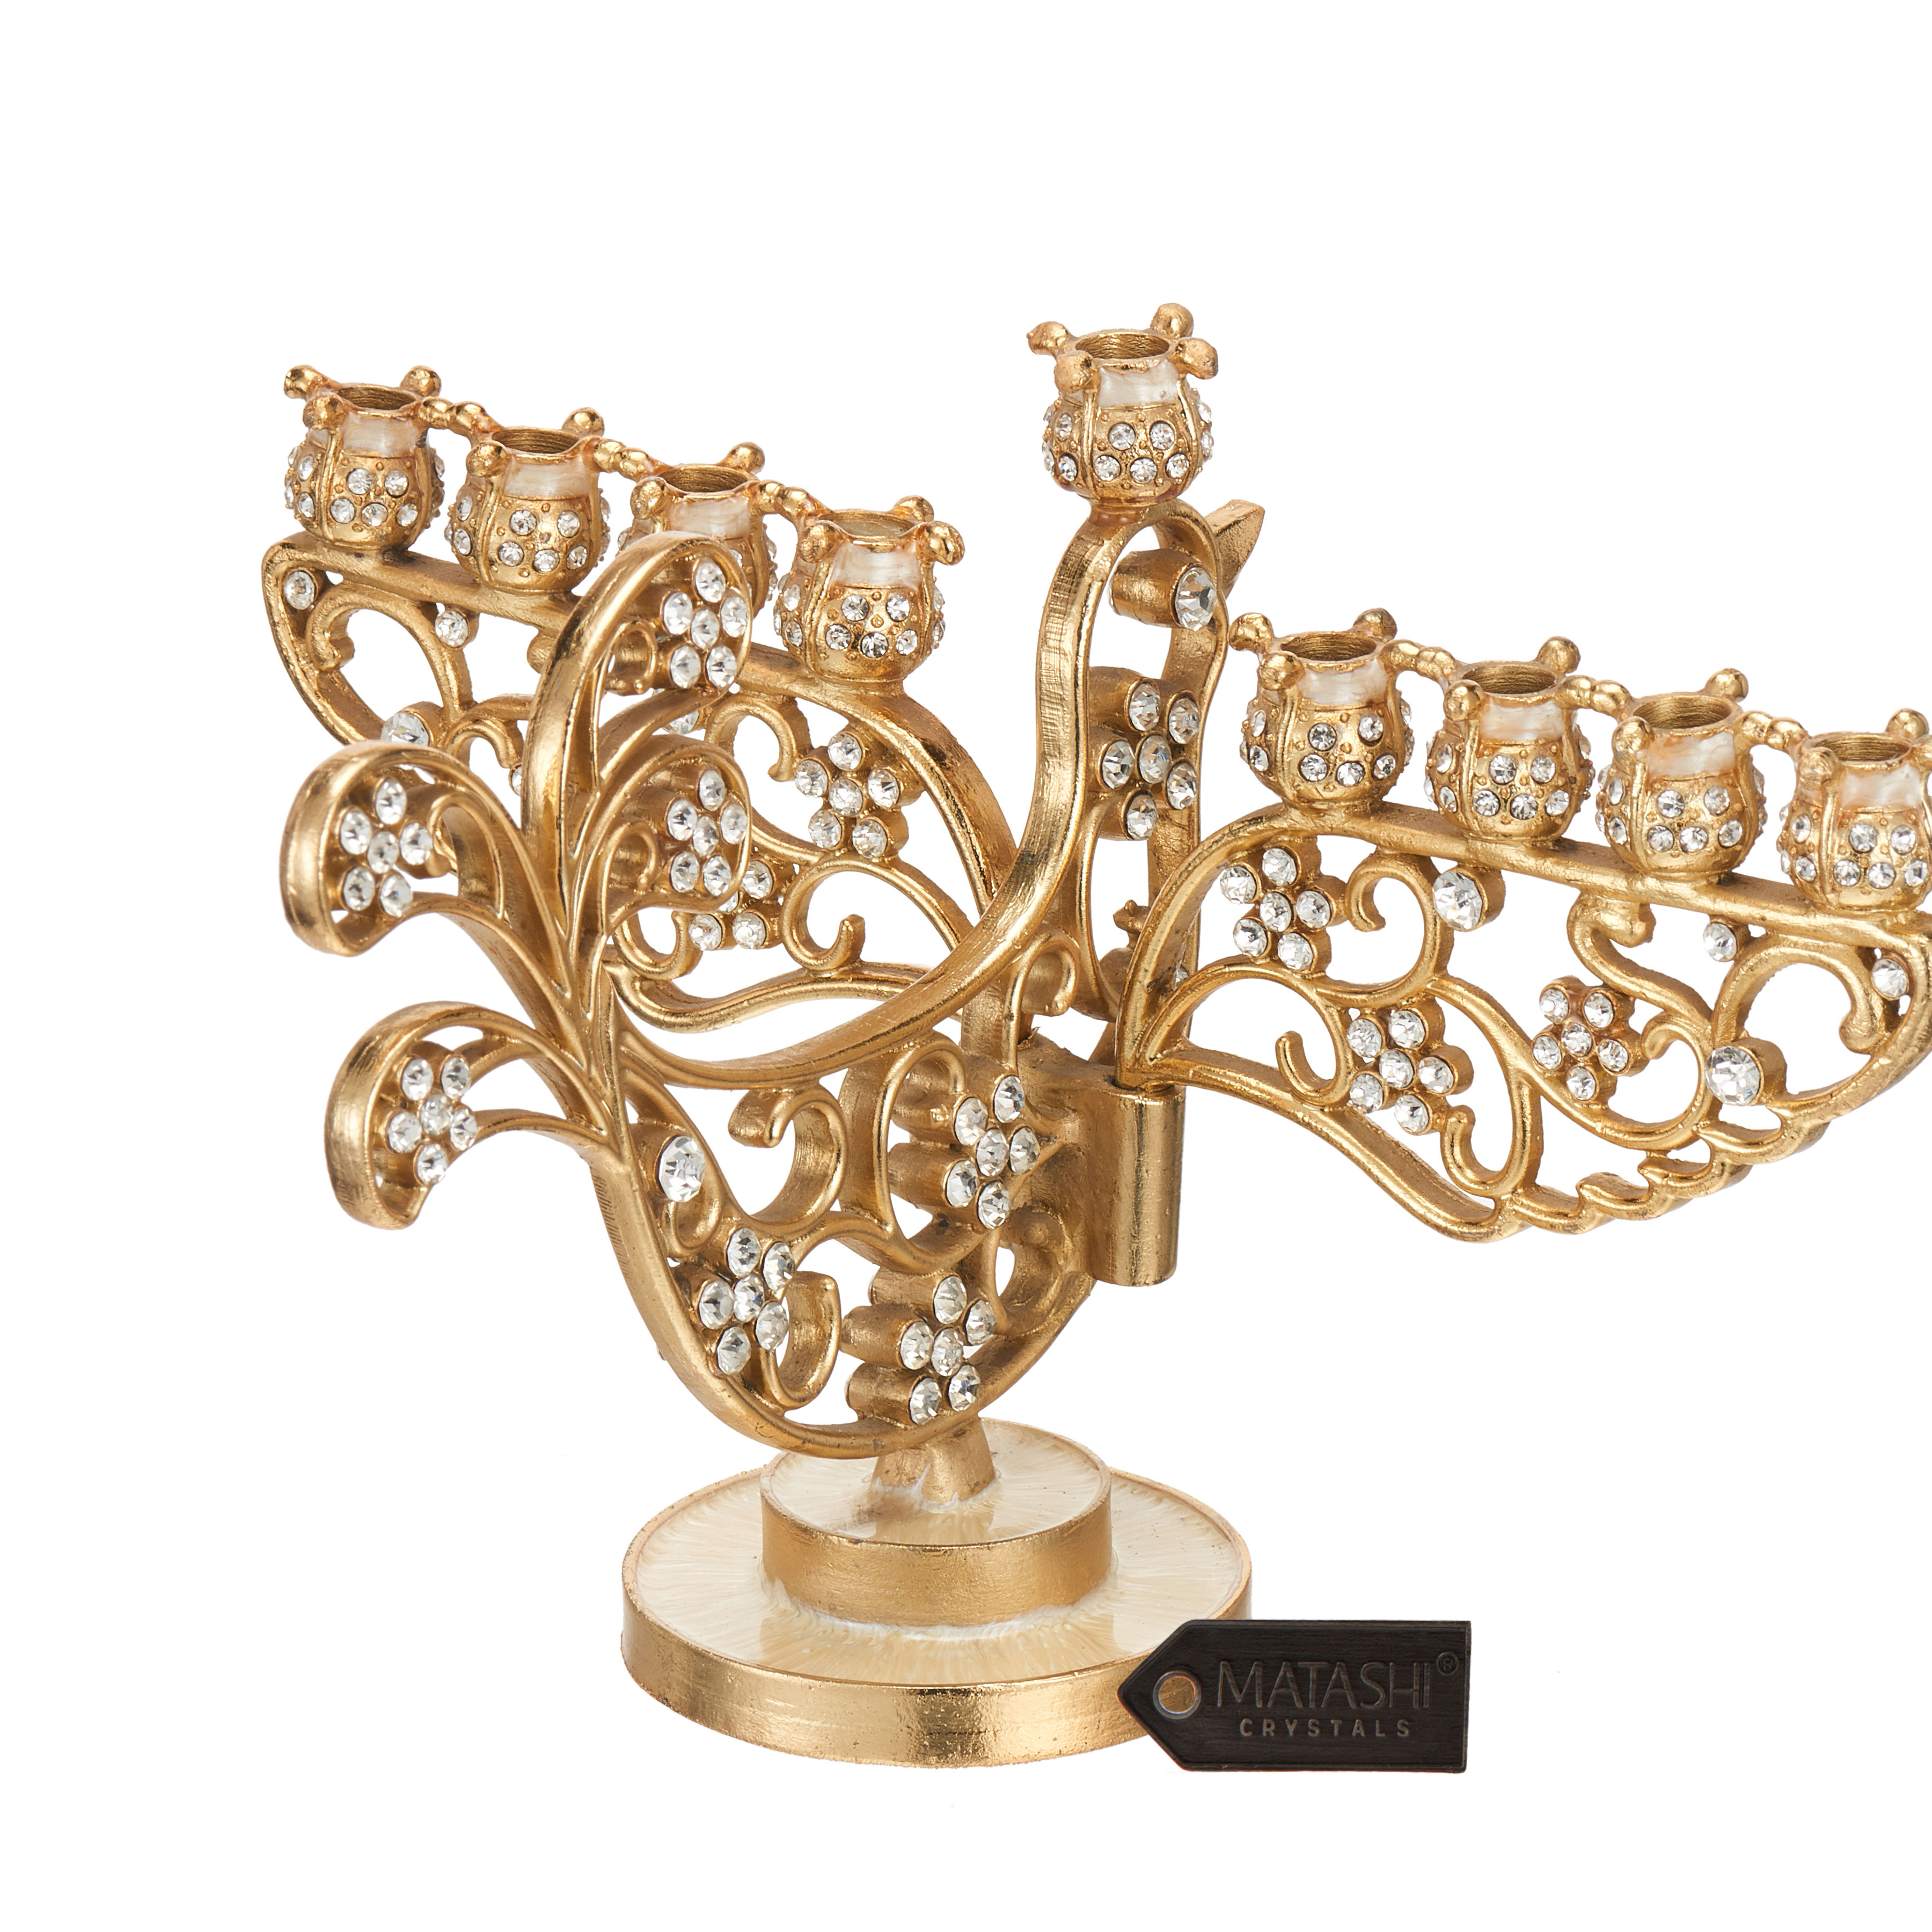 Matashi Gold Painted Dove Menorah Candelabra, Embellished With High Quality Crystals